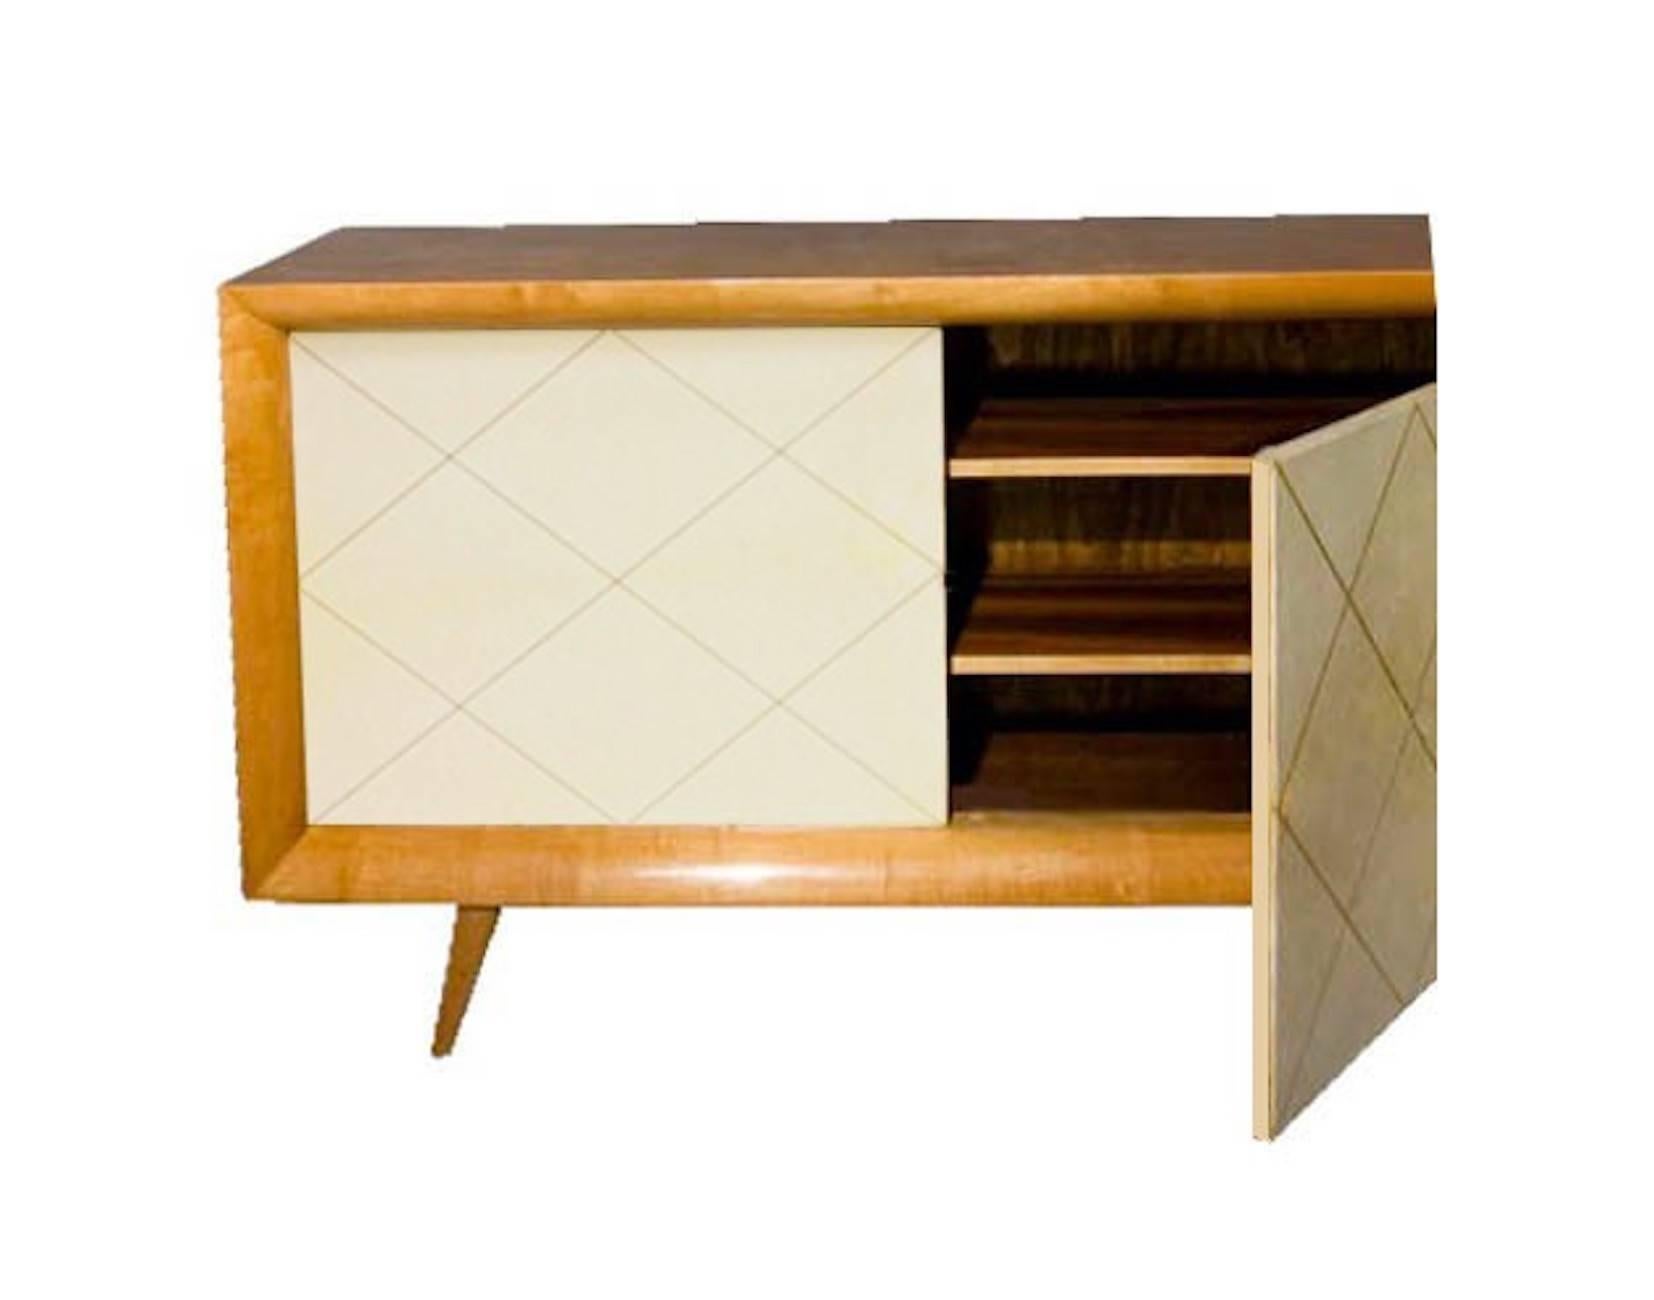 Sideboard in oak and parchment goatskin Suzanne Guiguichon style 1950. 
Clearly inspired by French Art Deco and Modernism, this piece has two doors in warm white/beige parchment goatskin leather, matte finished, with rhombus motif metal inlayed.